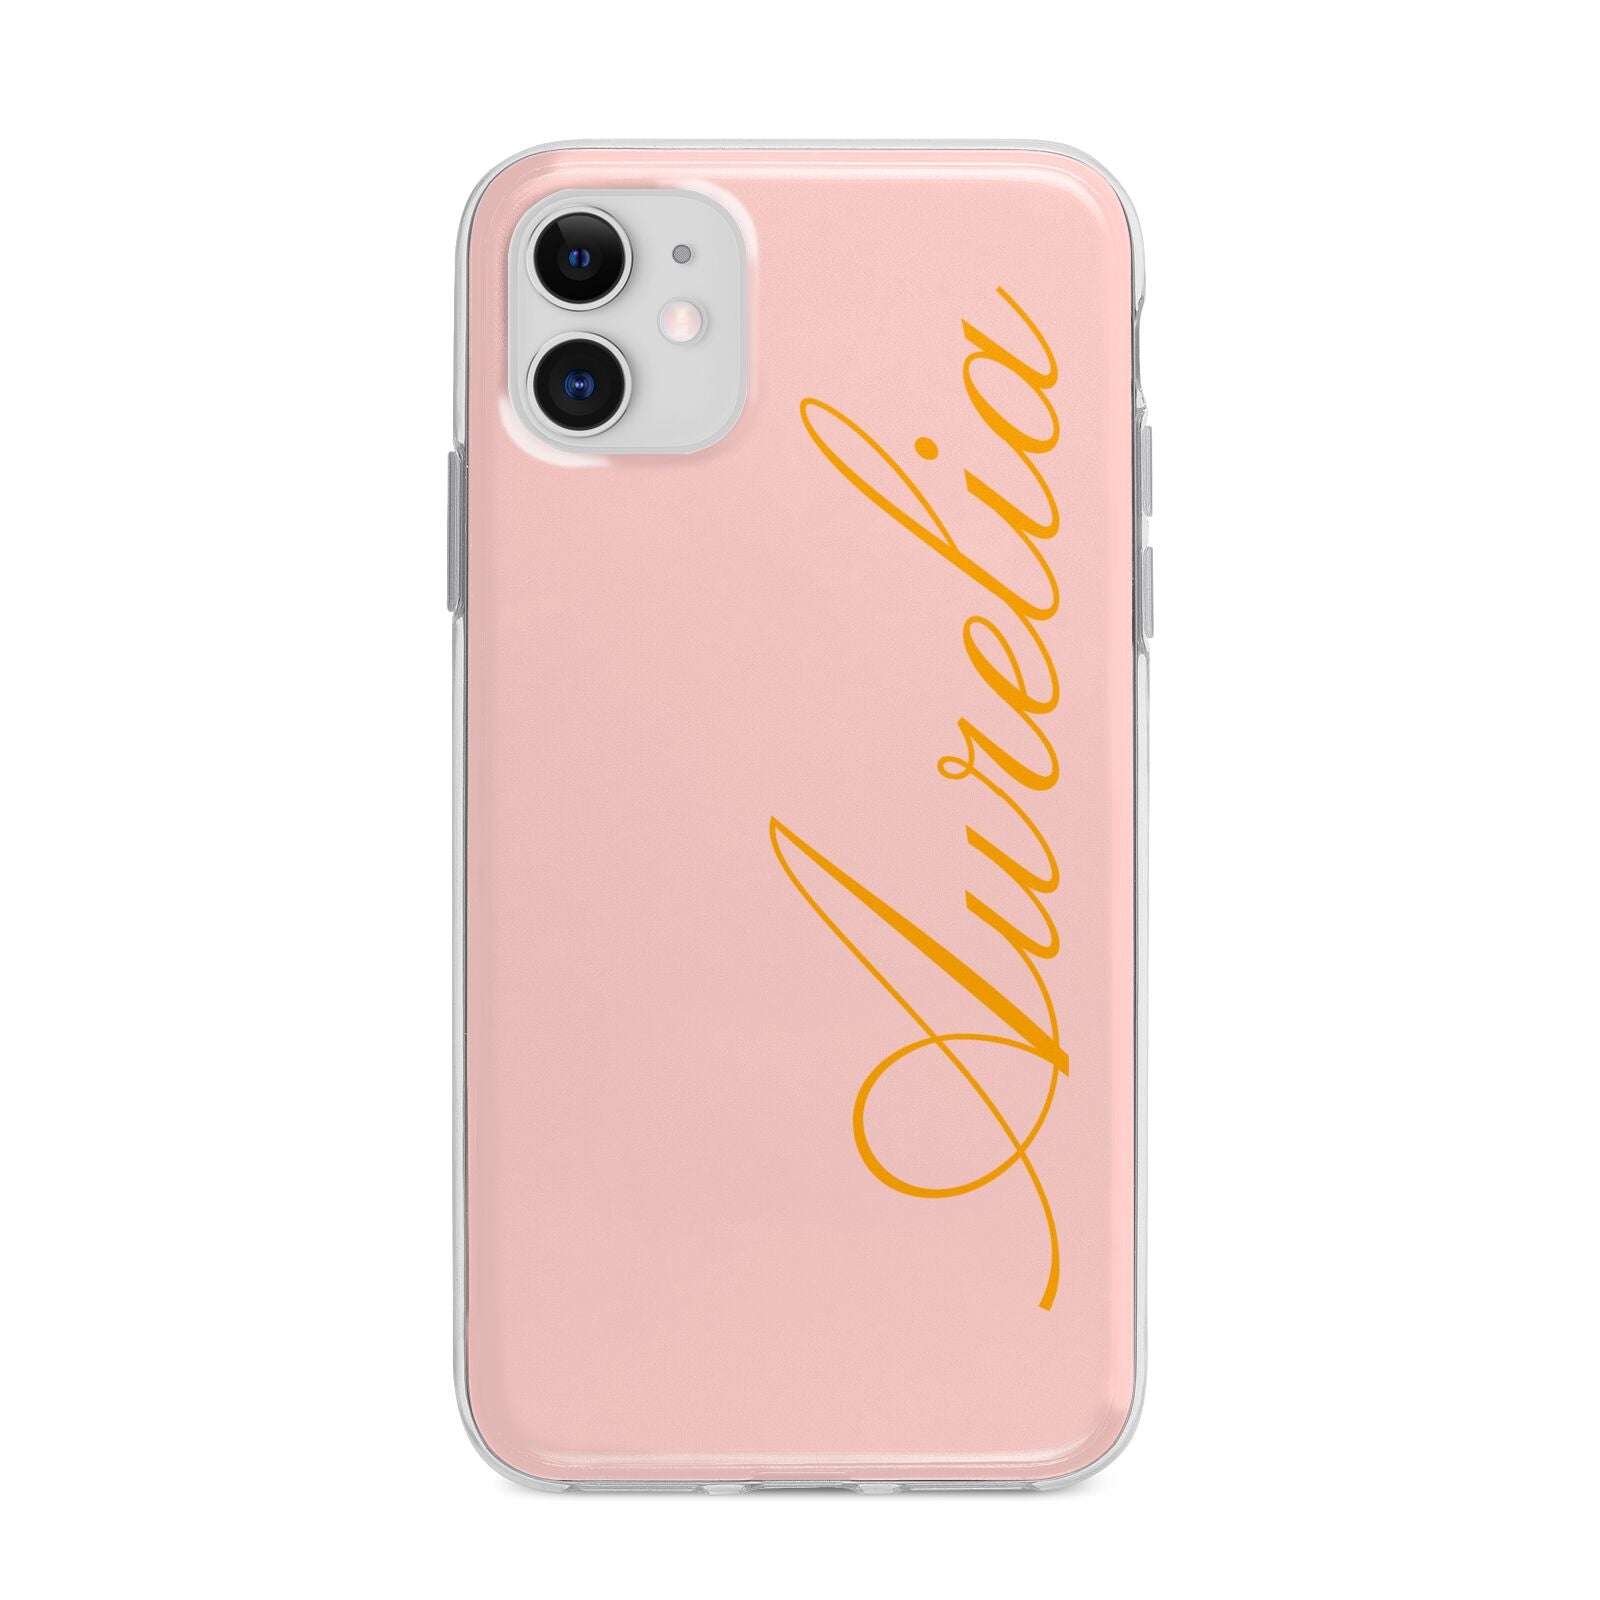 Custom Apple iPhone 11 in White with Bumper Case